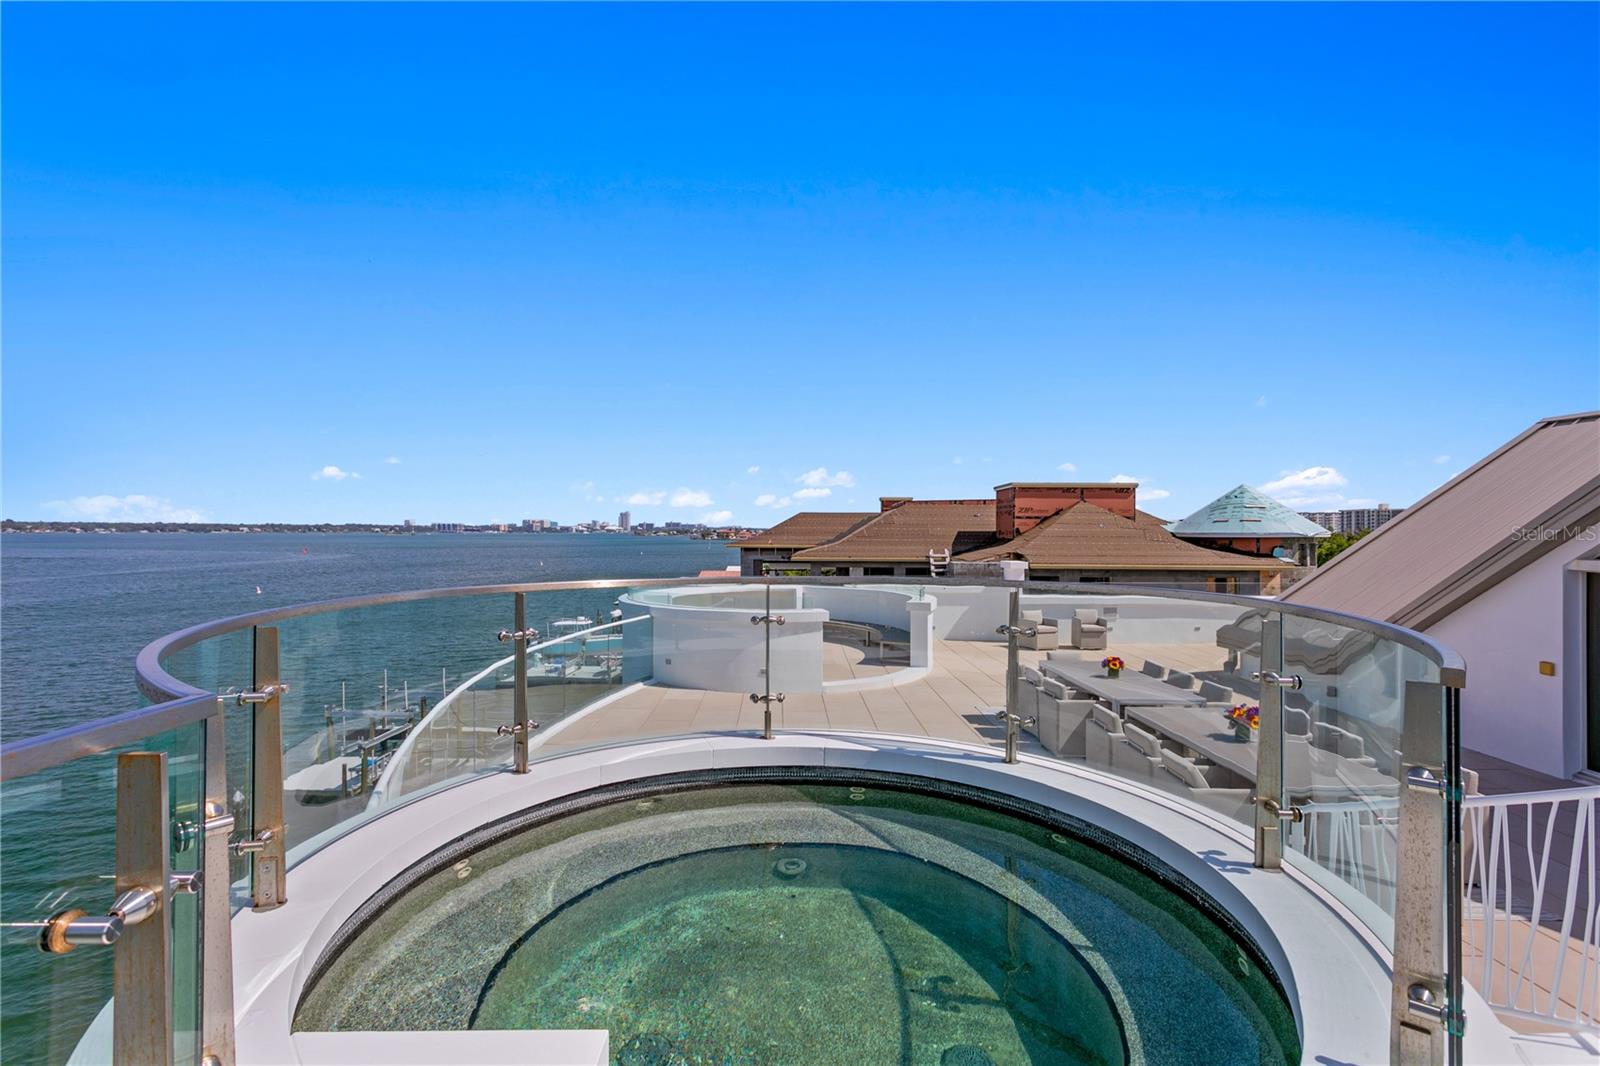 Roof Top Hot Tub with amazing water views.